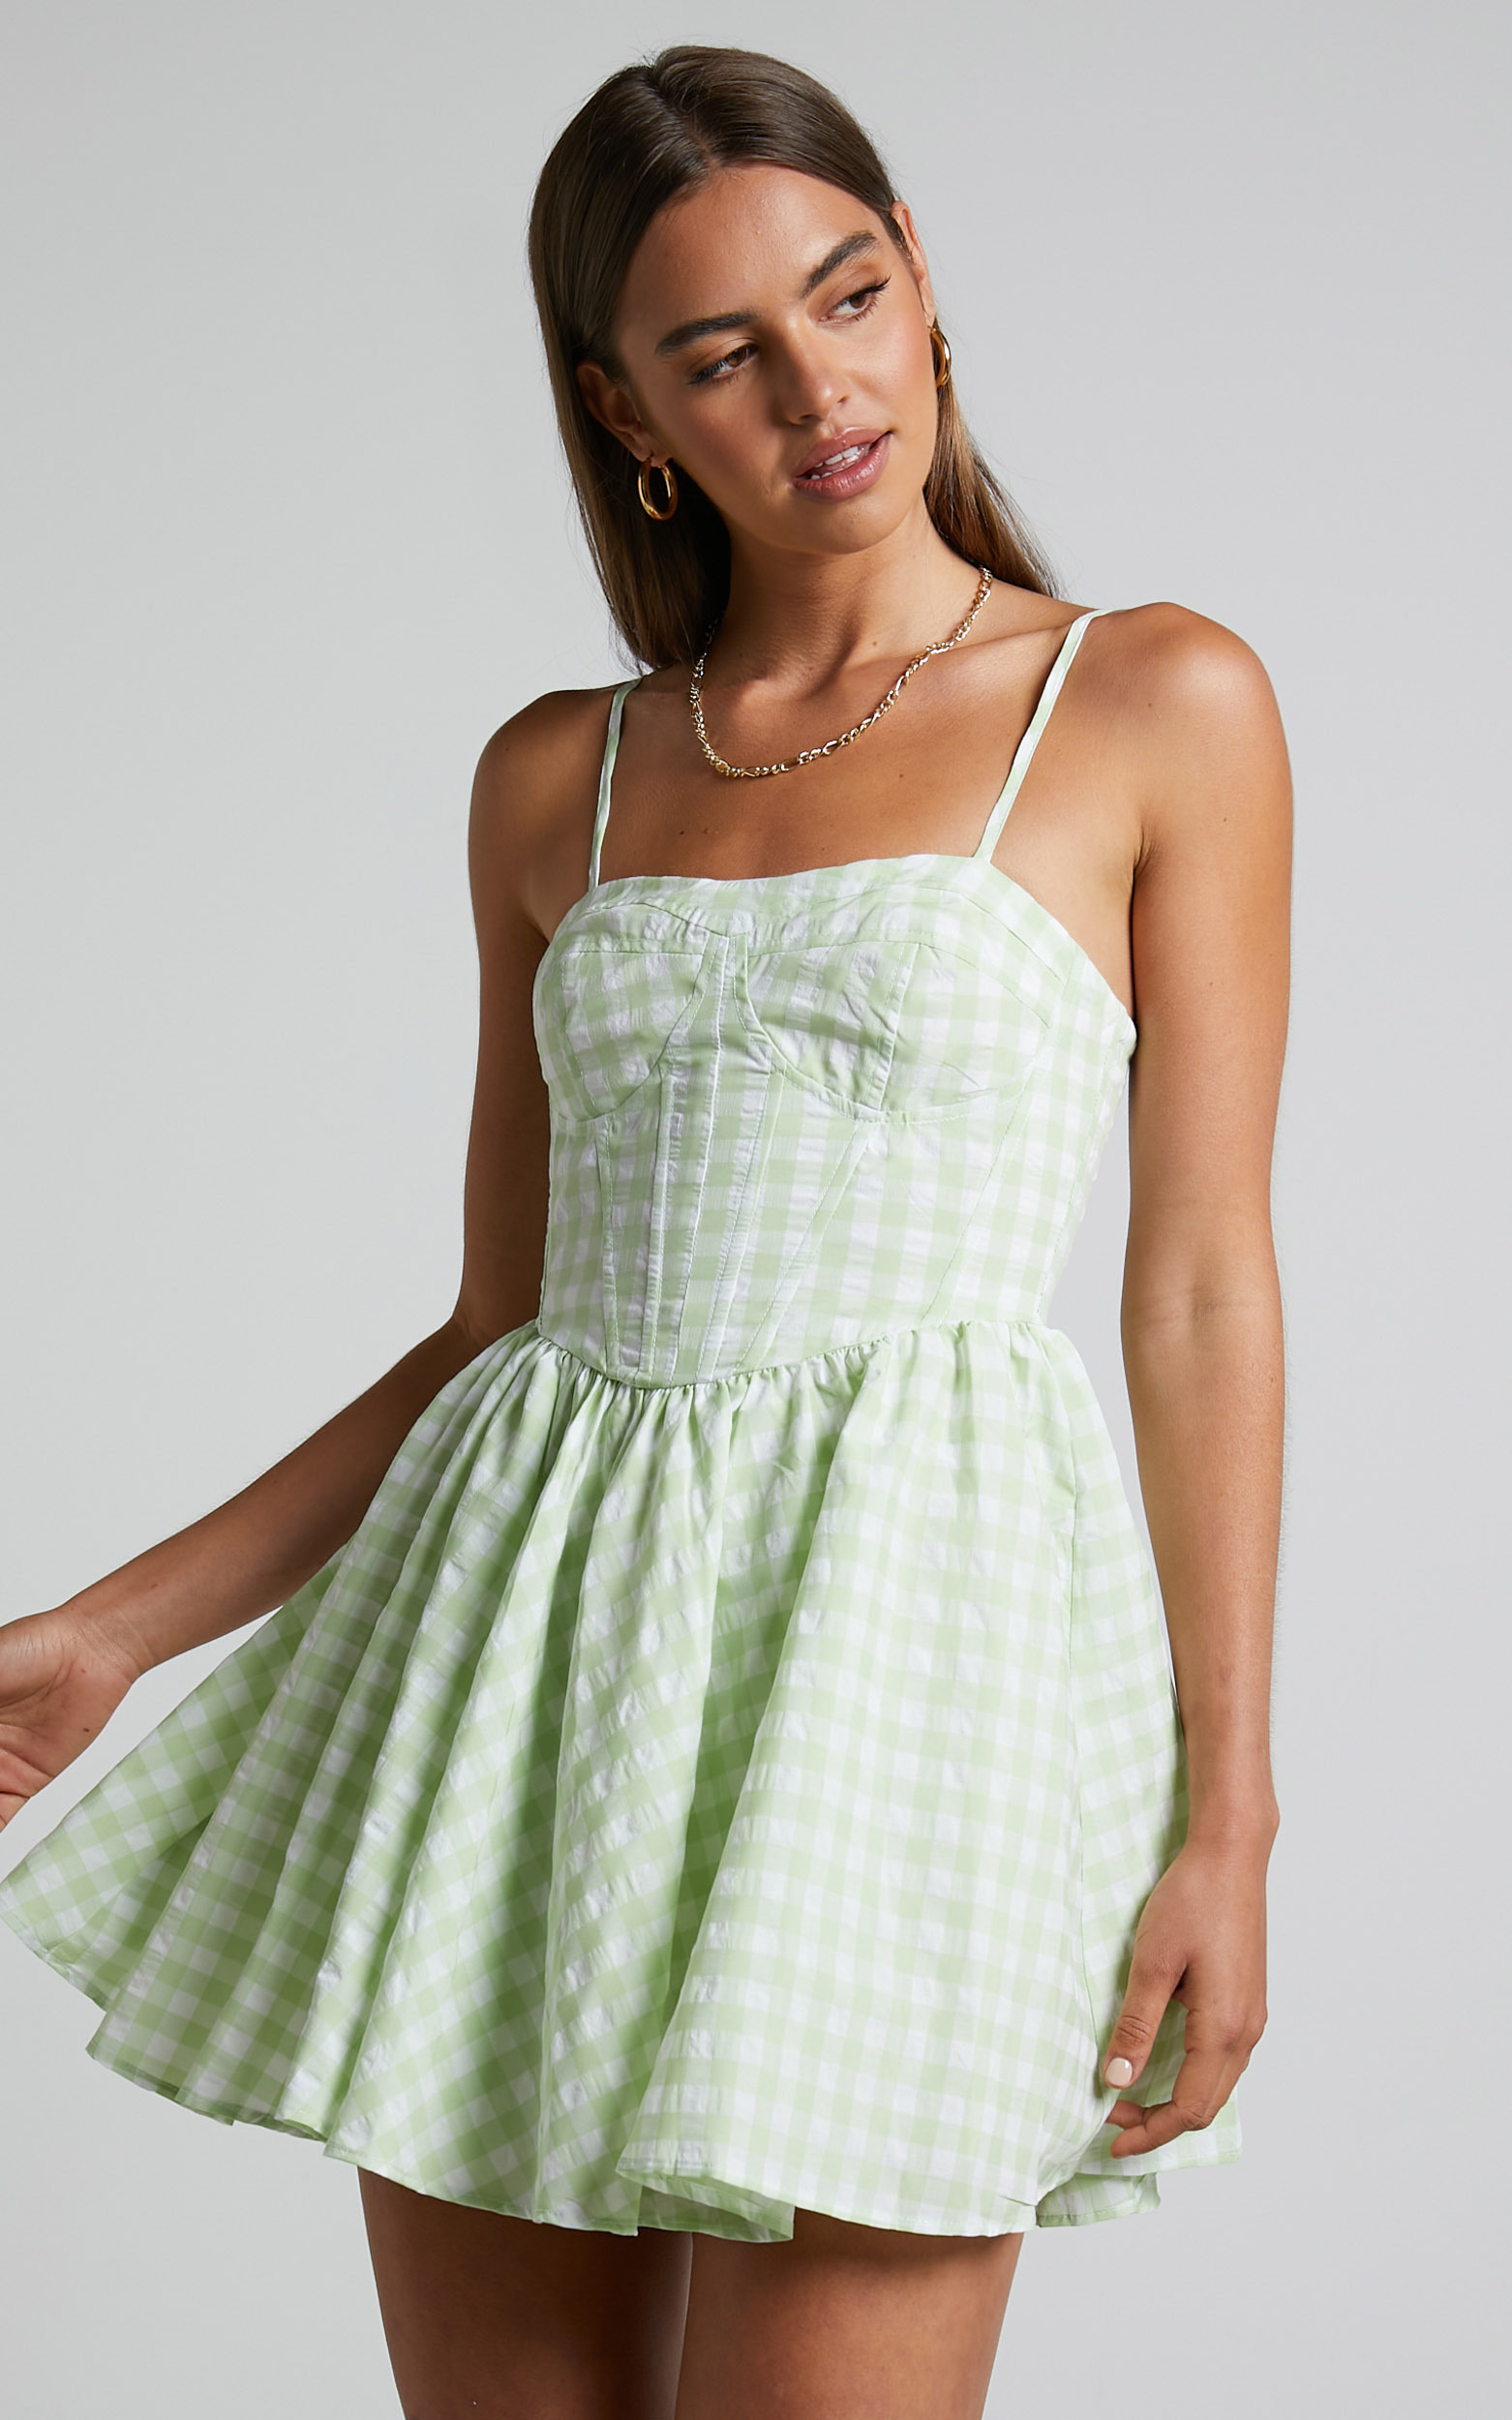 Madelyn Mini Dress - Fit and Flare Corset Dress in Mint Green Gingham | Showpo